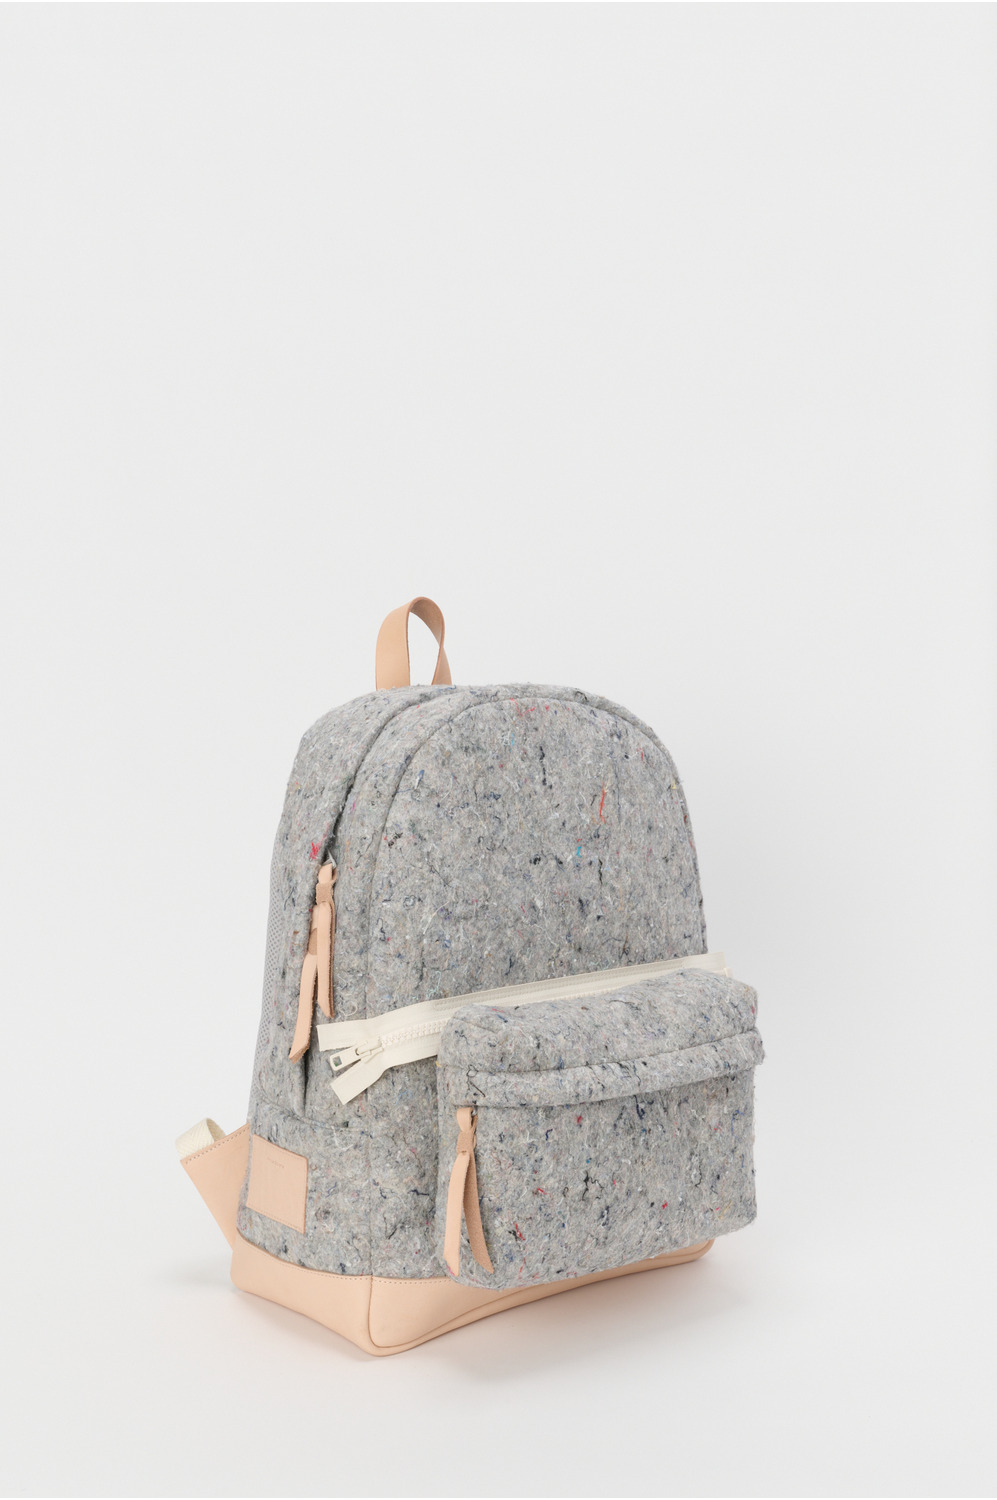 Recycled felt) backpack 詳細画像 mix gray/natural 2